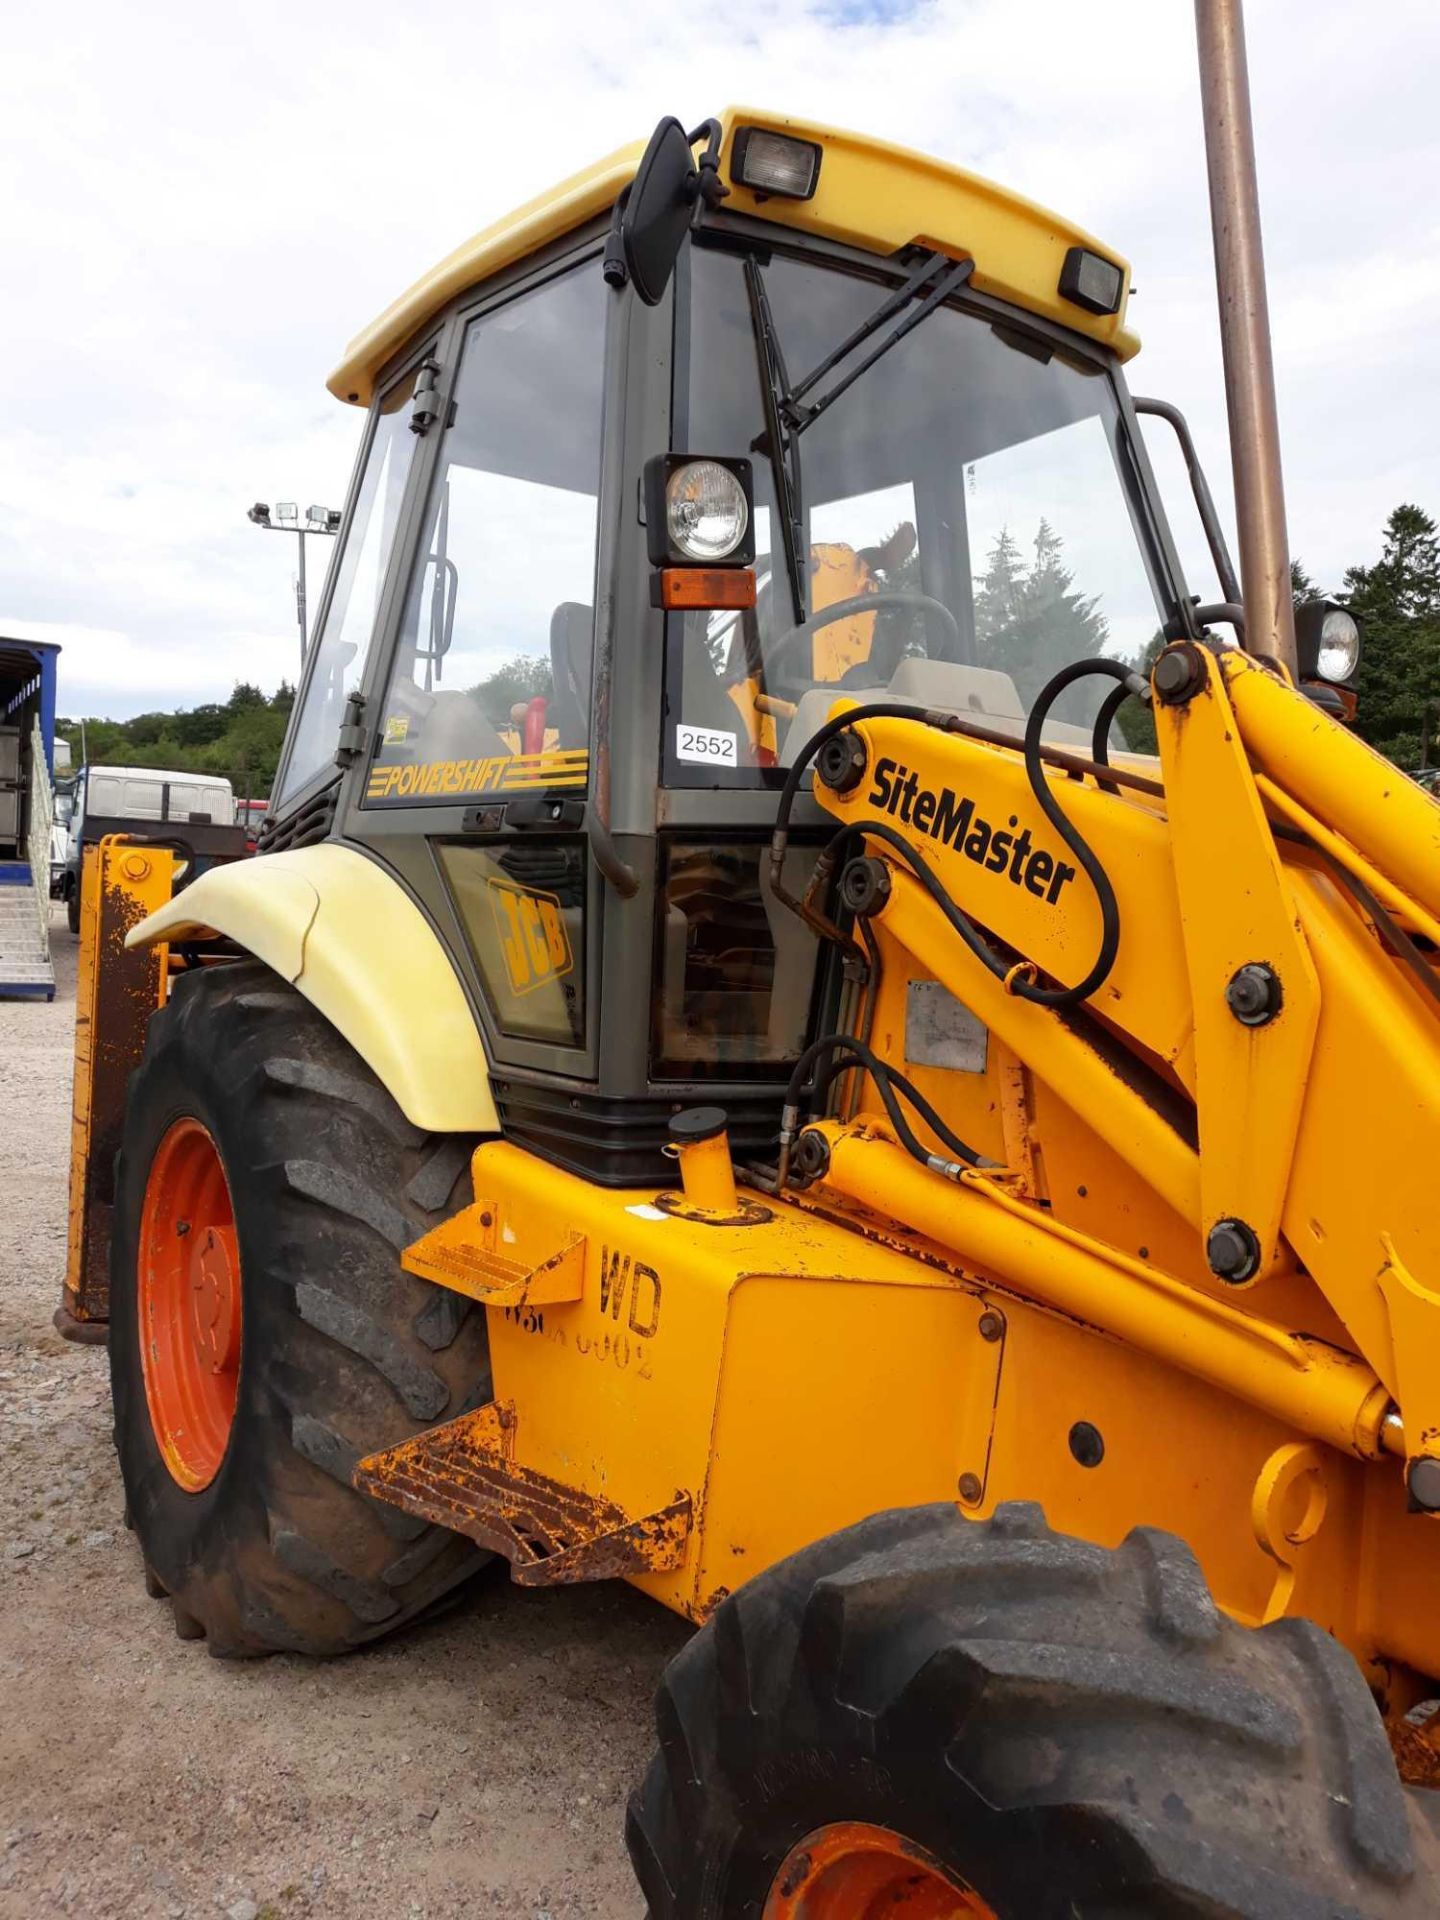 Jcb 3cx Sitemaster - 0cc X - Other - Image 3 of 6